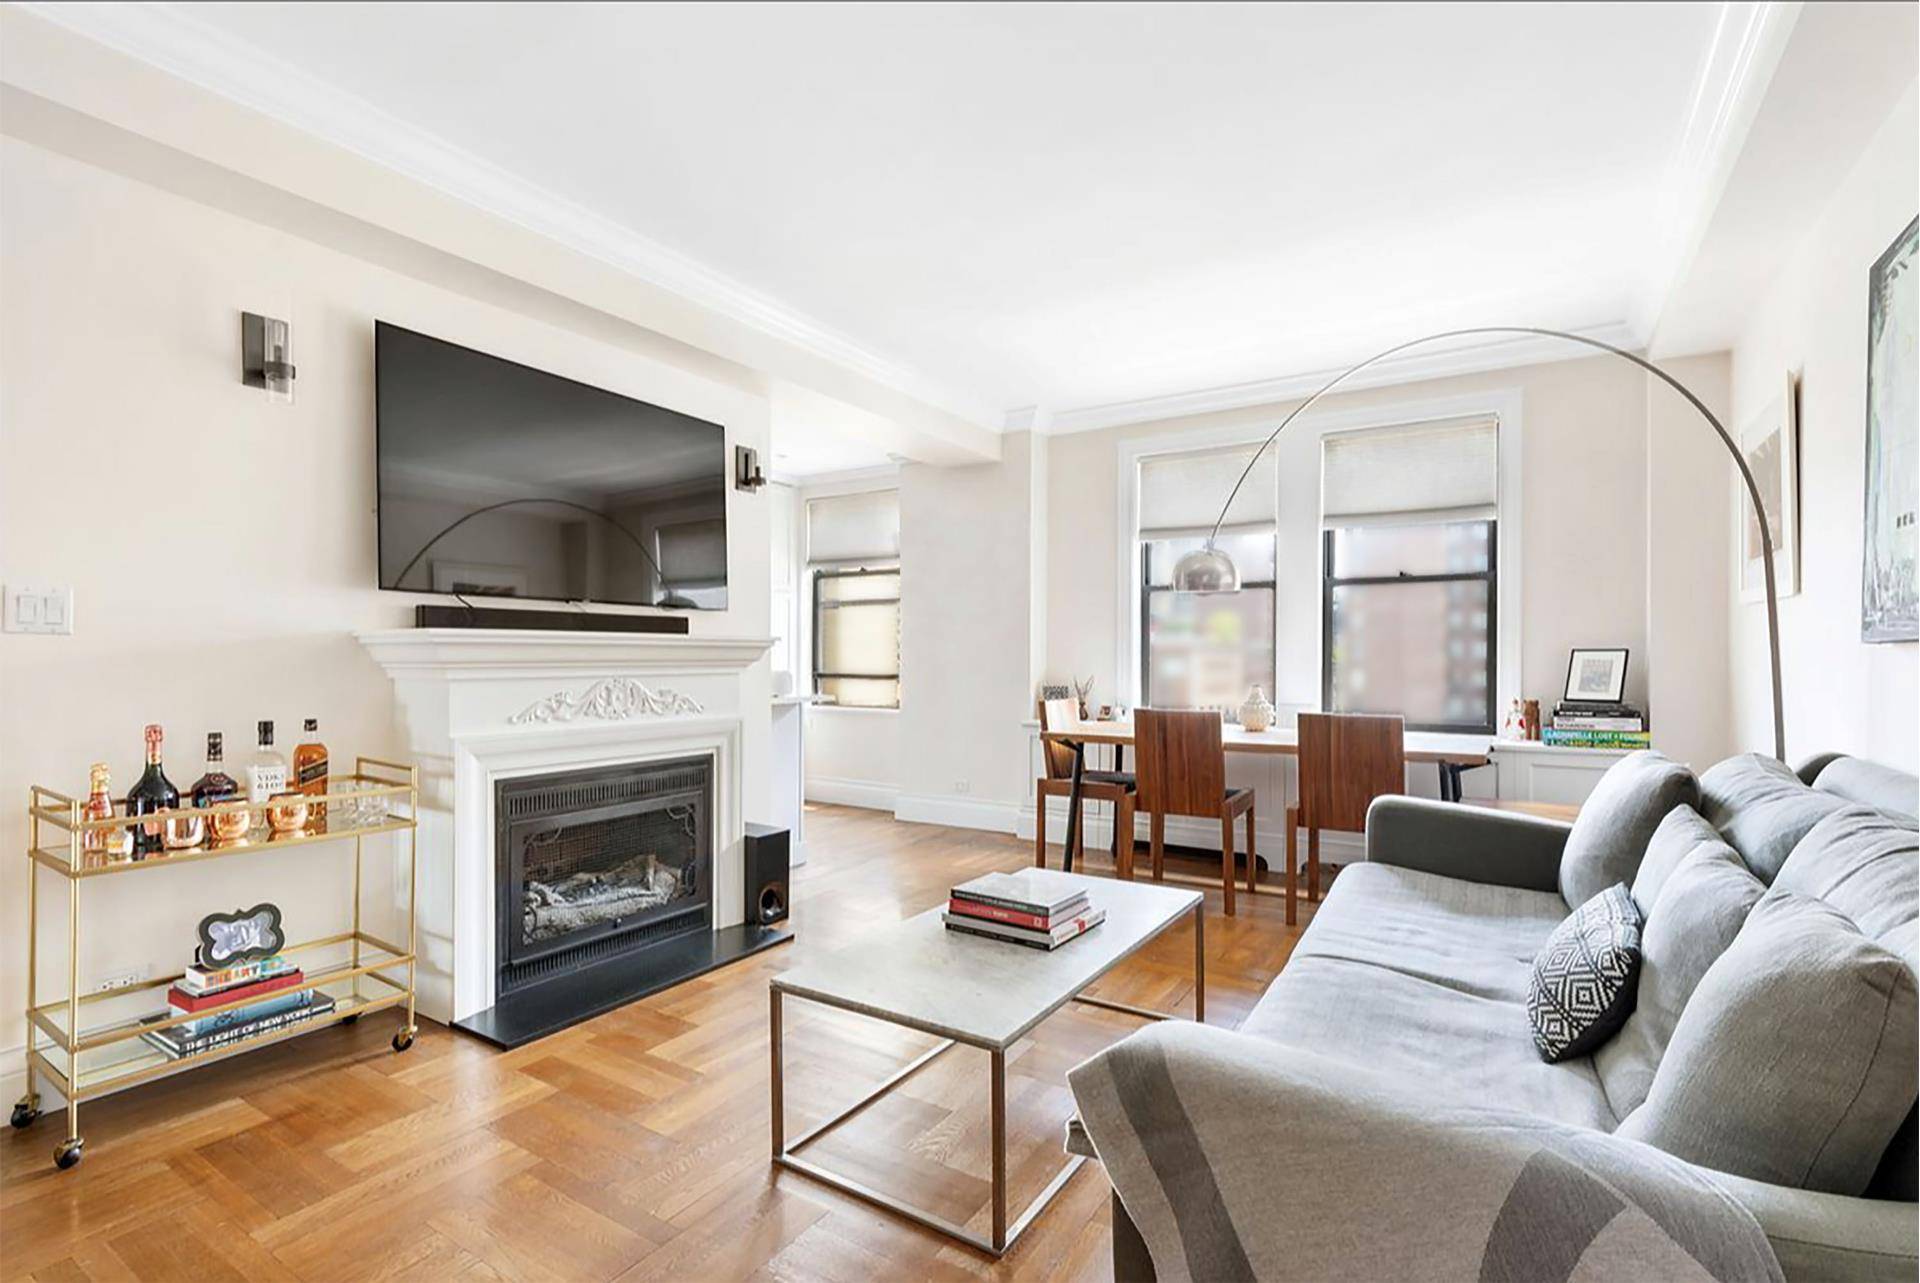 Have the best of both worlds prewar charm with the modern convenience of a fully renovated corner apartment, washer dryer, deep soaking tub in the bathroom, and a Fully equipped ...